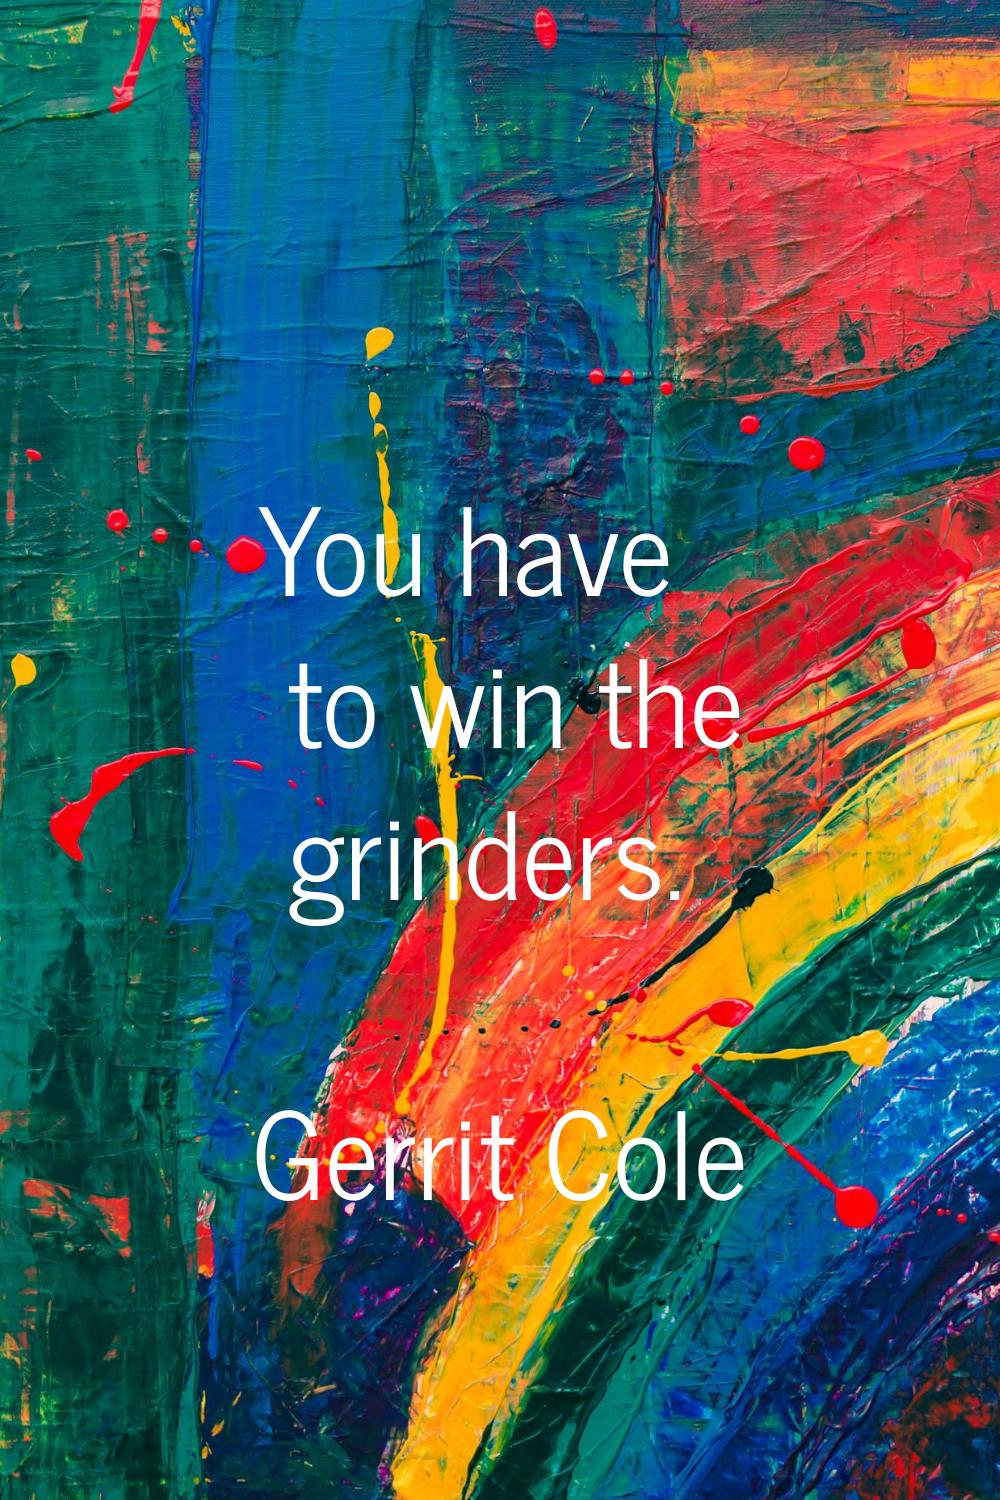 You have to win the grinders.